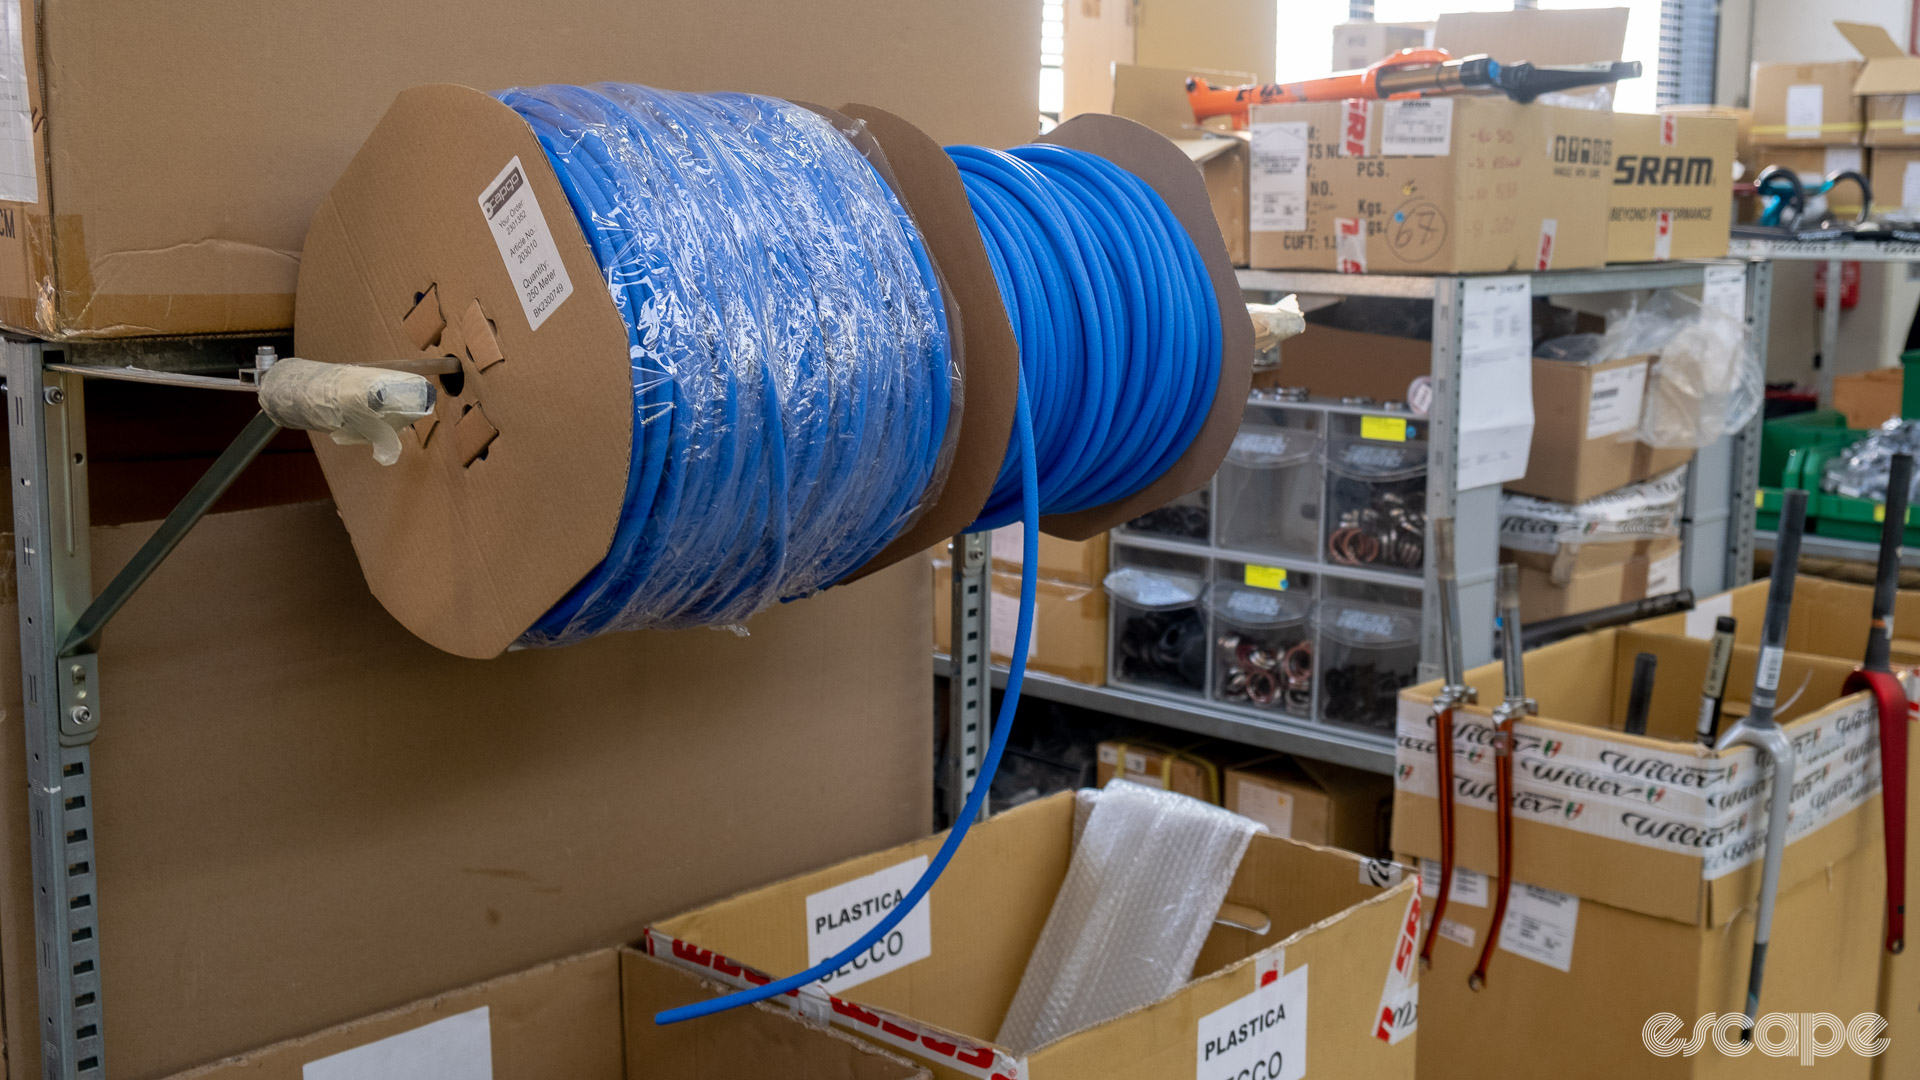 The photo shows rolls of blue foam liners at Wilier's assembly line 